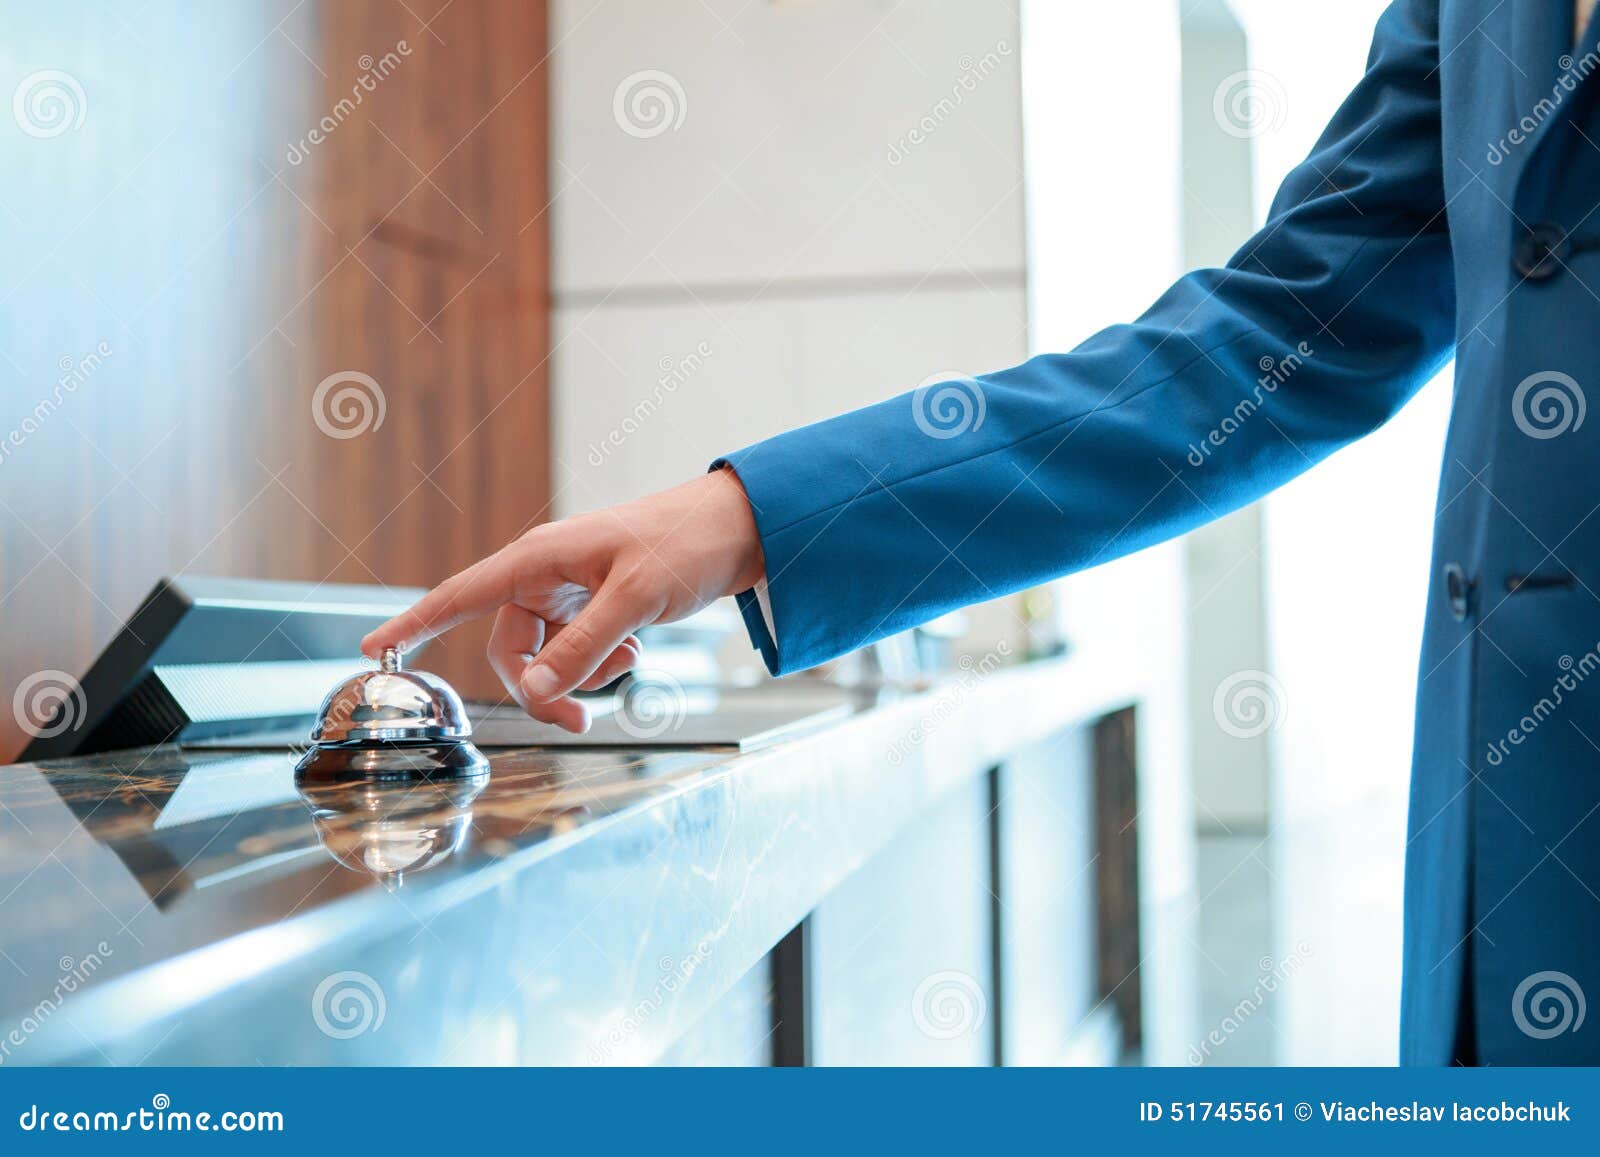 Hotel Service Bell At Reception Stock Image Image Of Hand